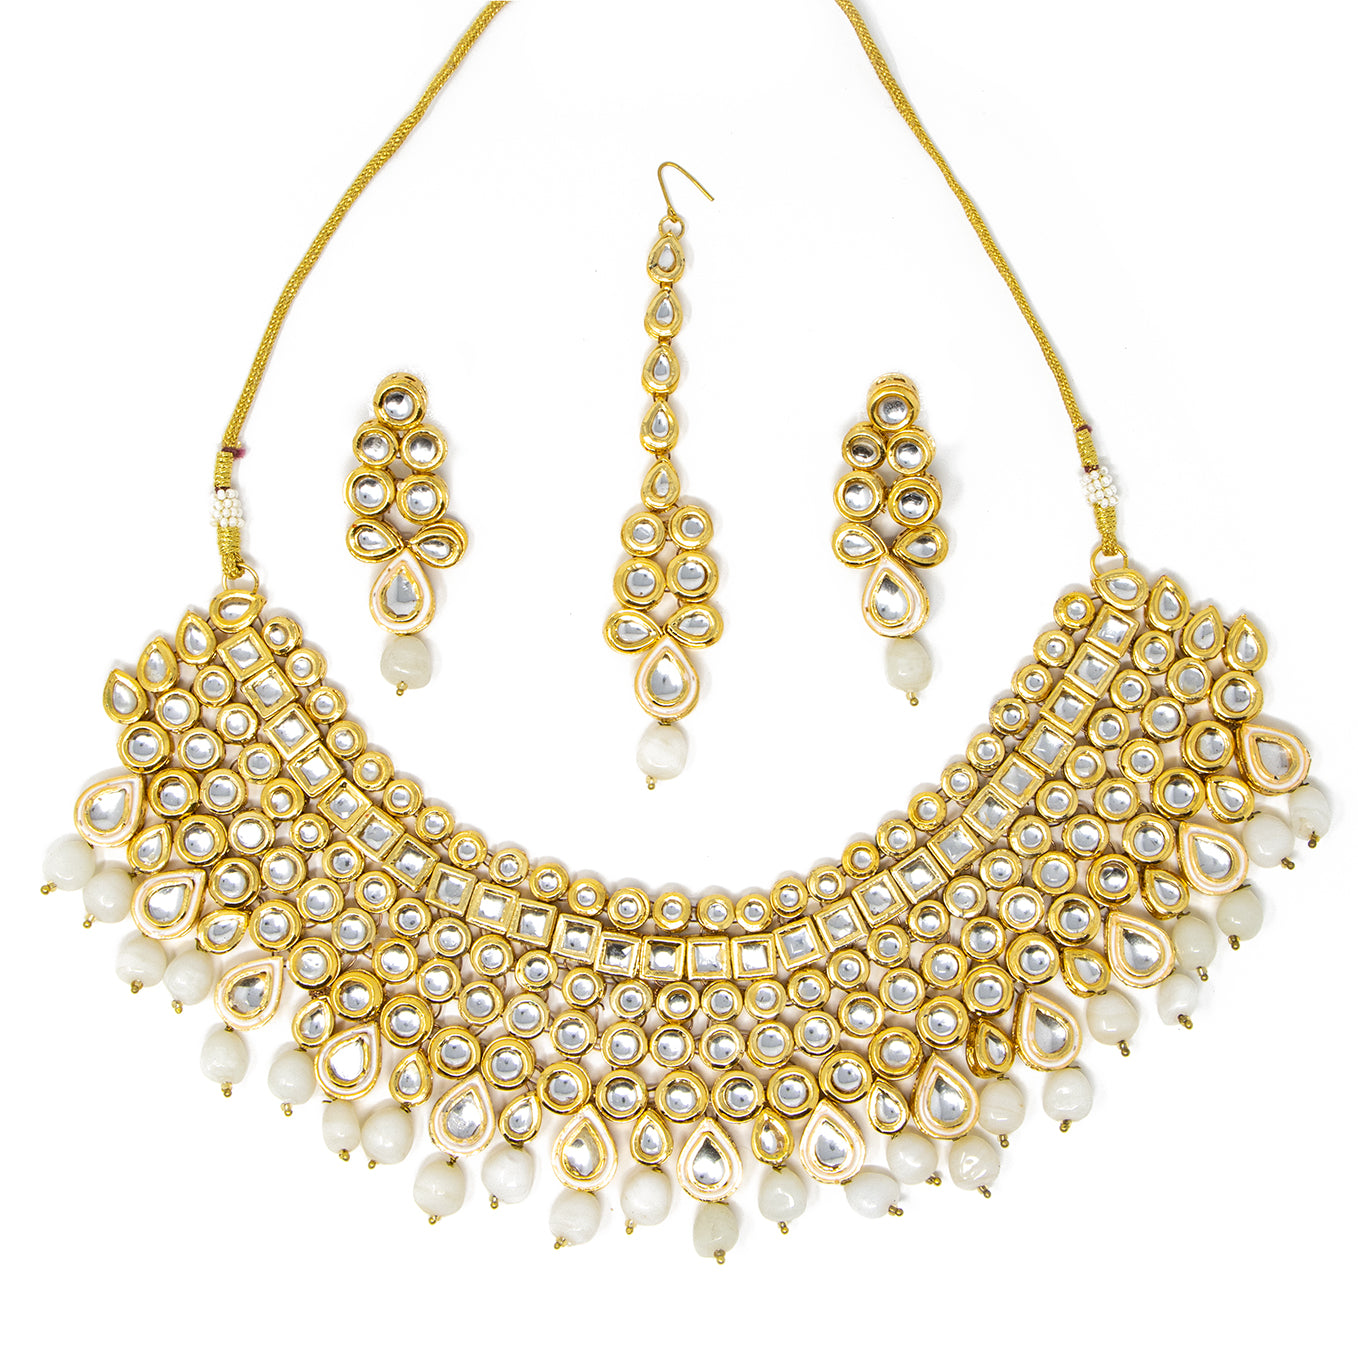 Gold and Gray 3 piece Necklace with earrings and bindi